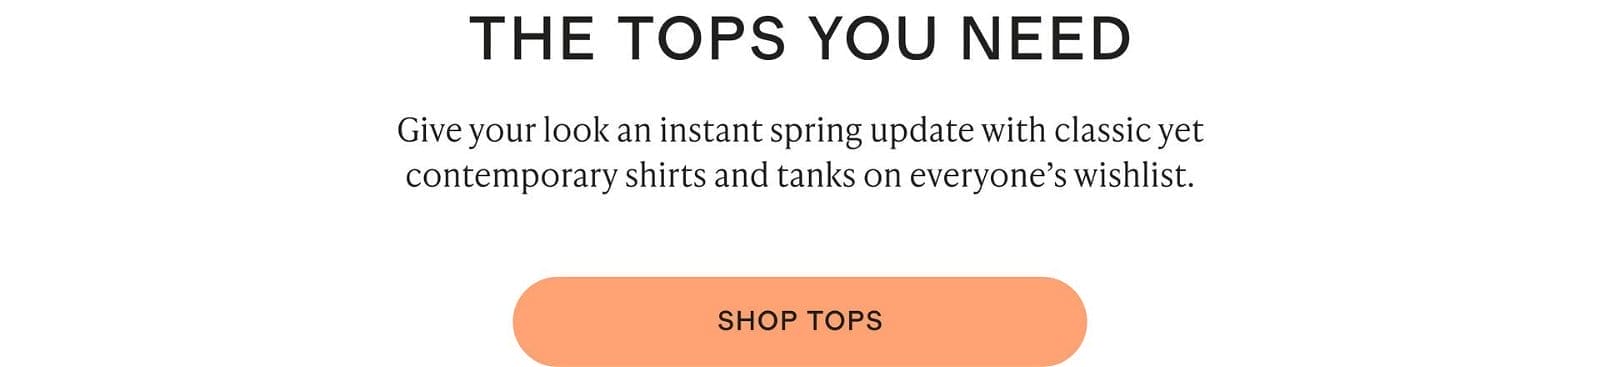 The tops you need